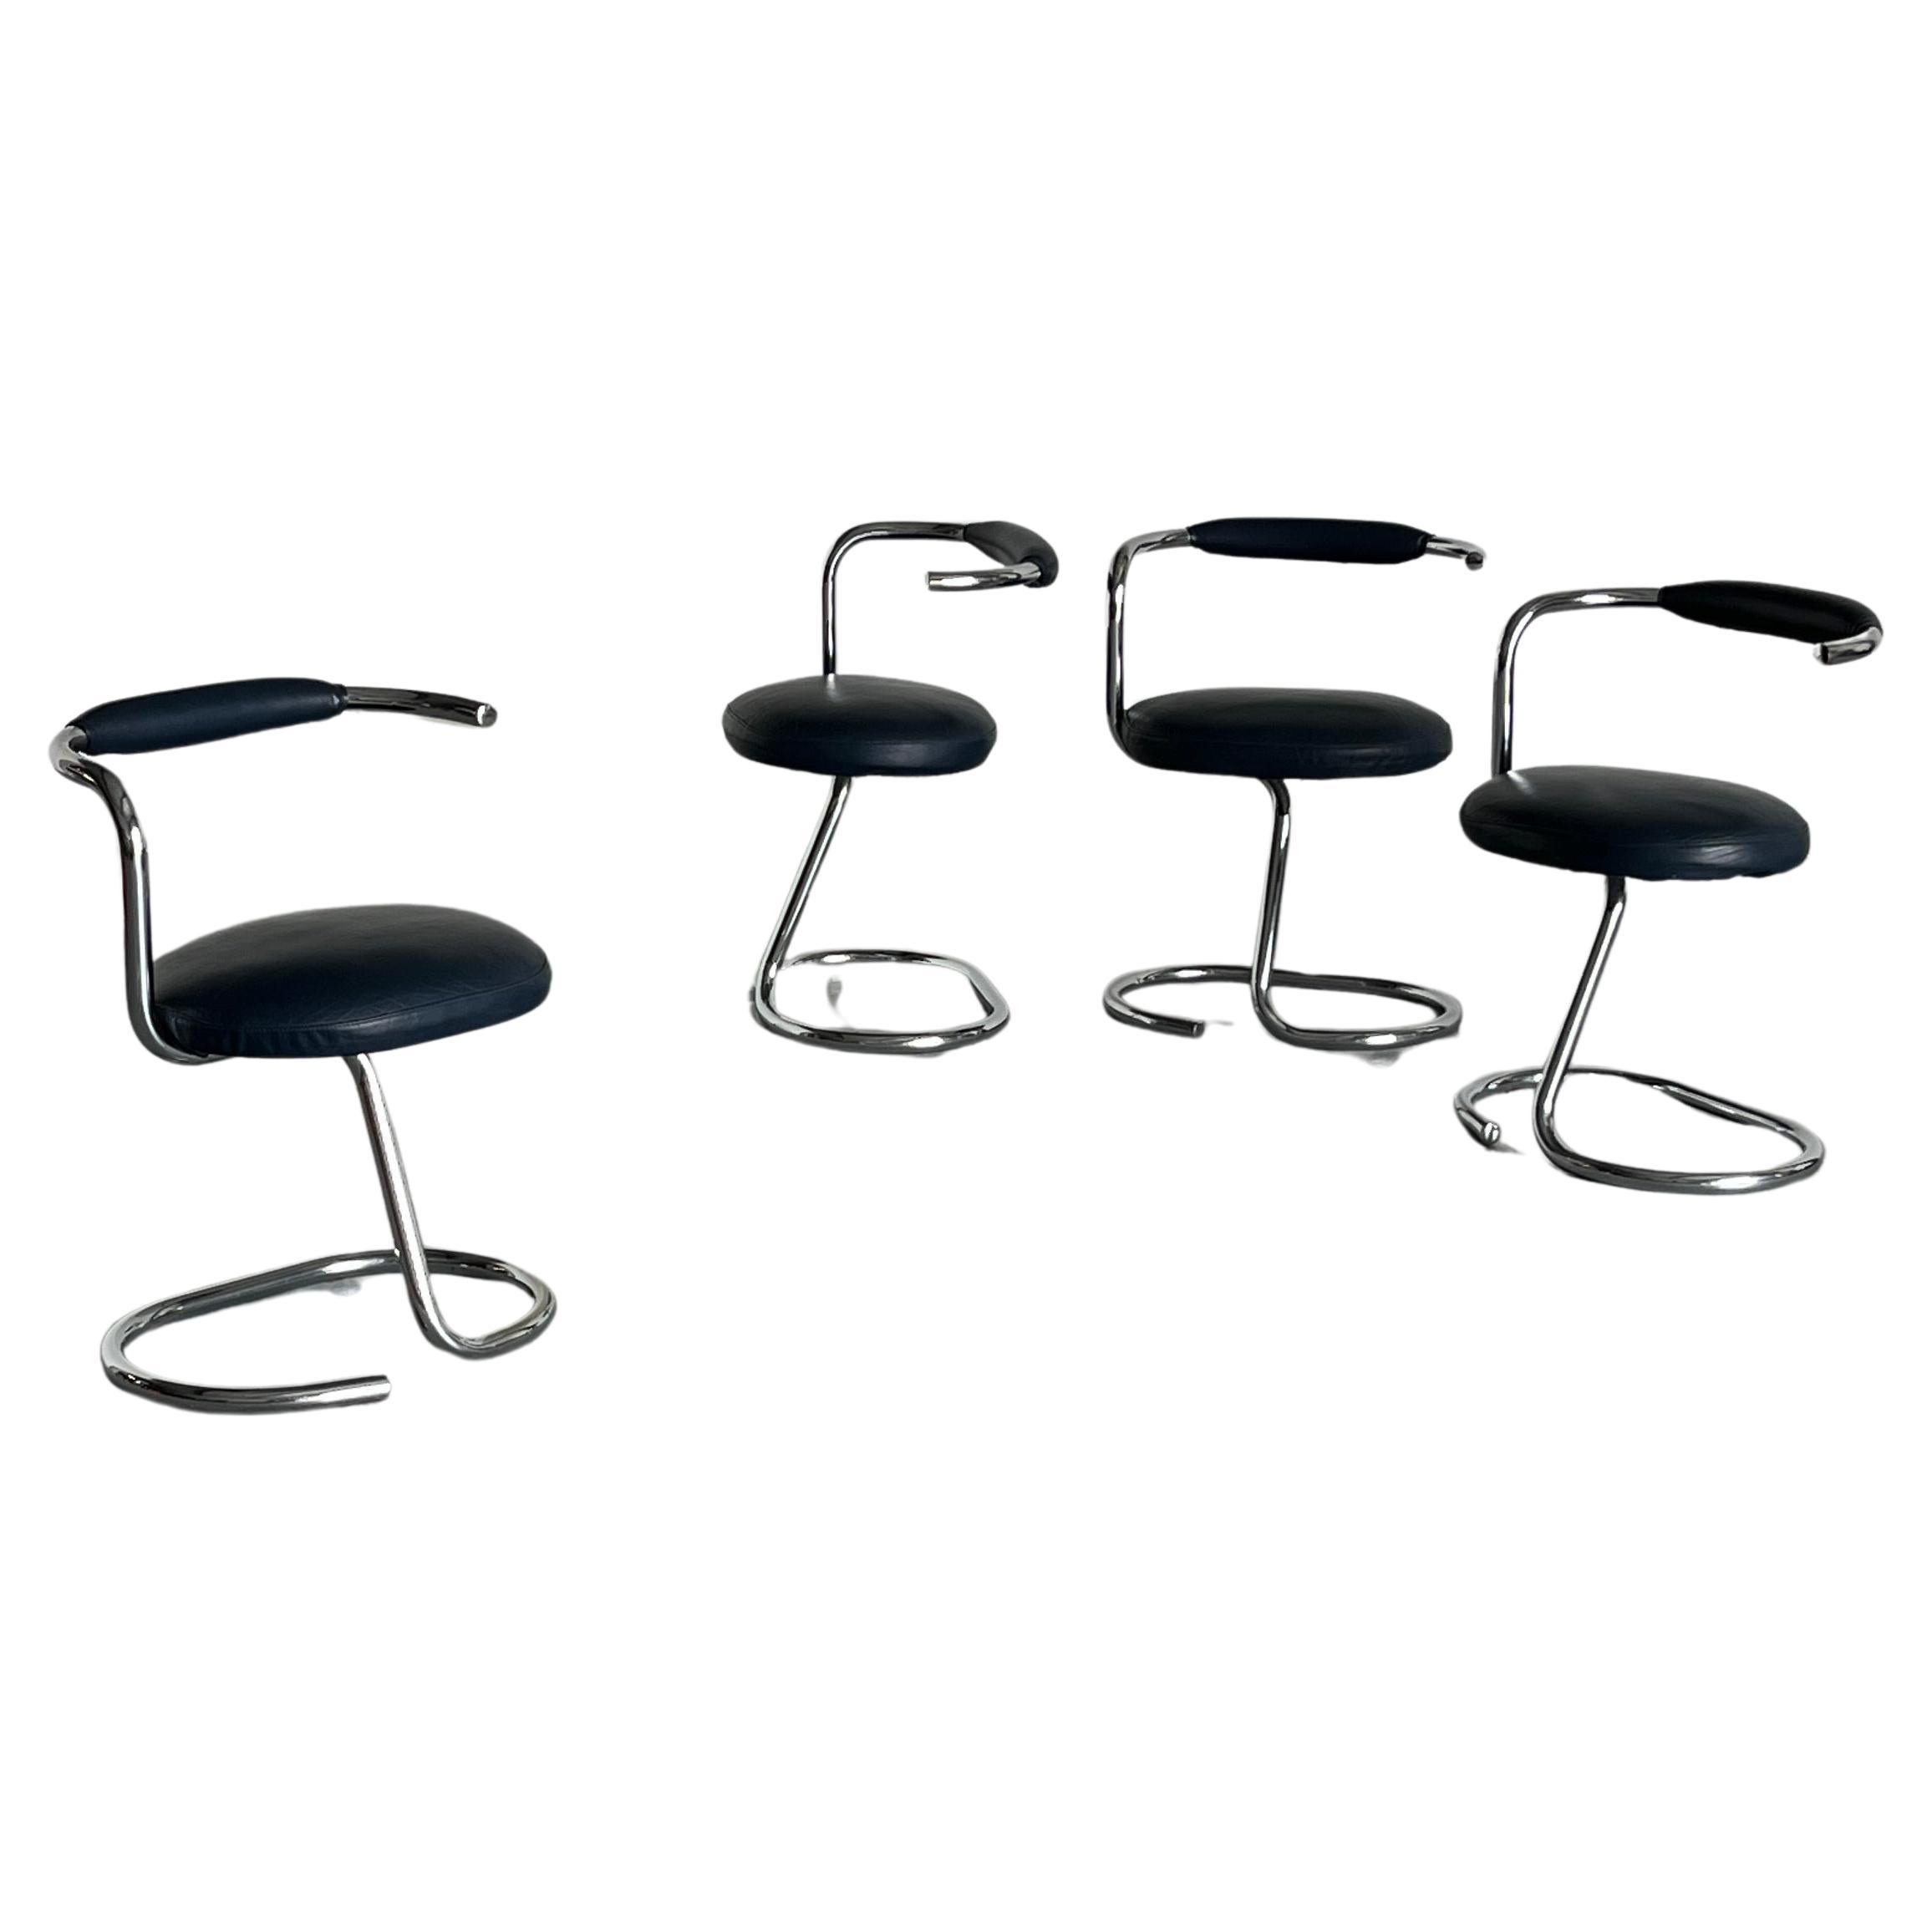 Giotto Stoppino Chairs